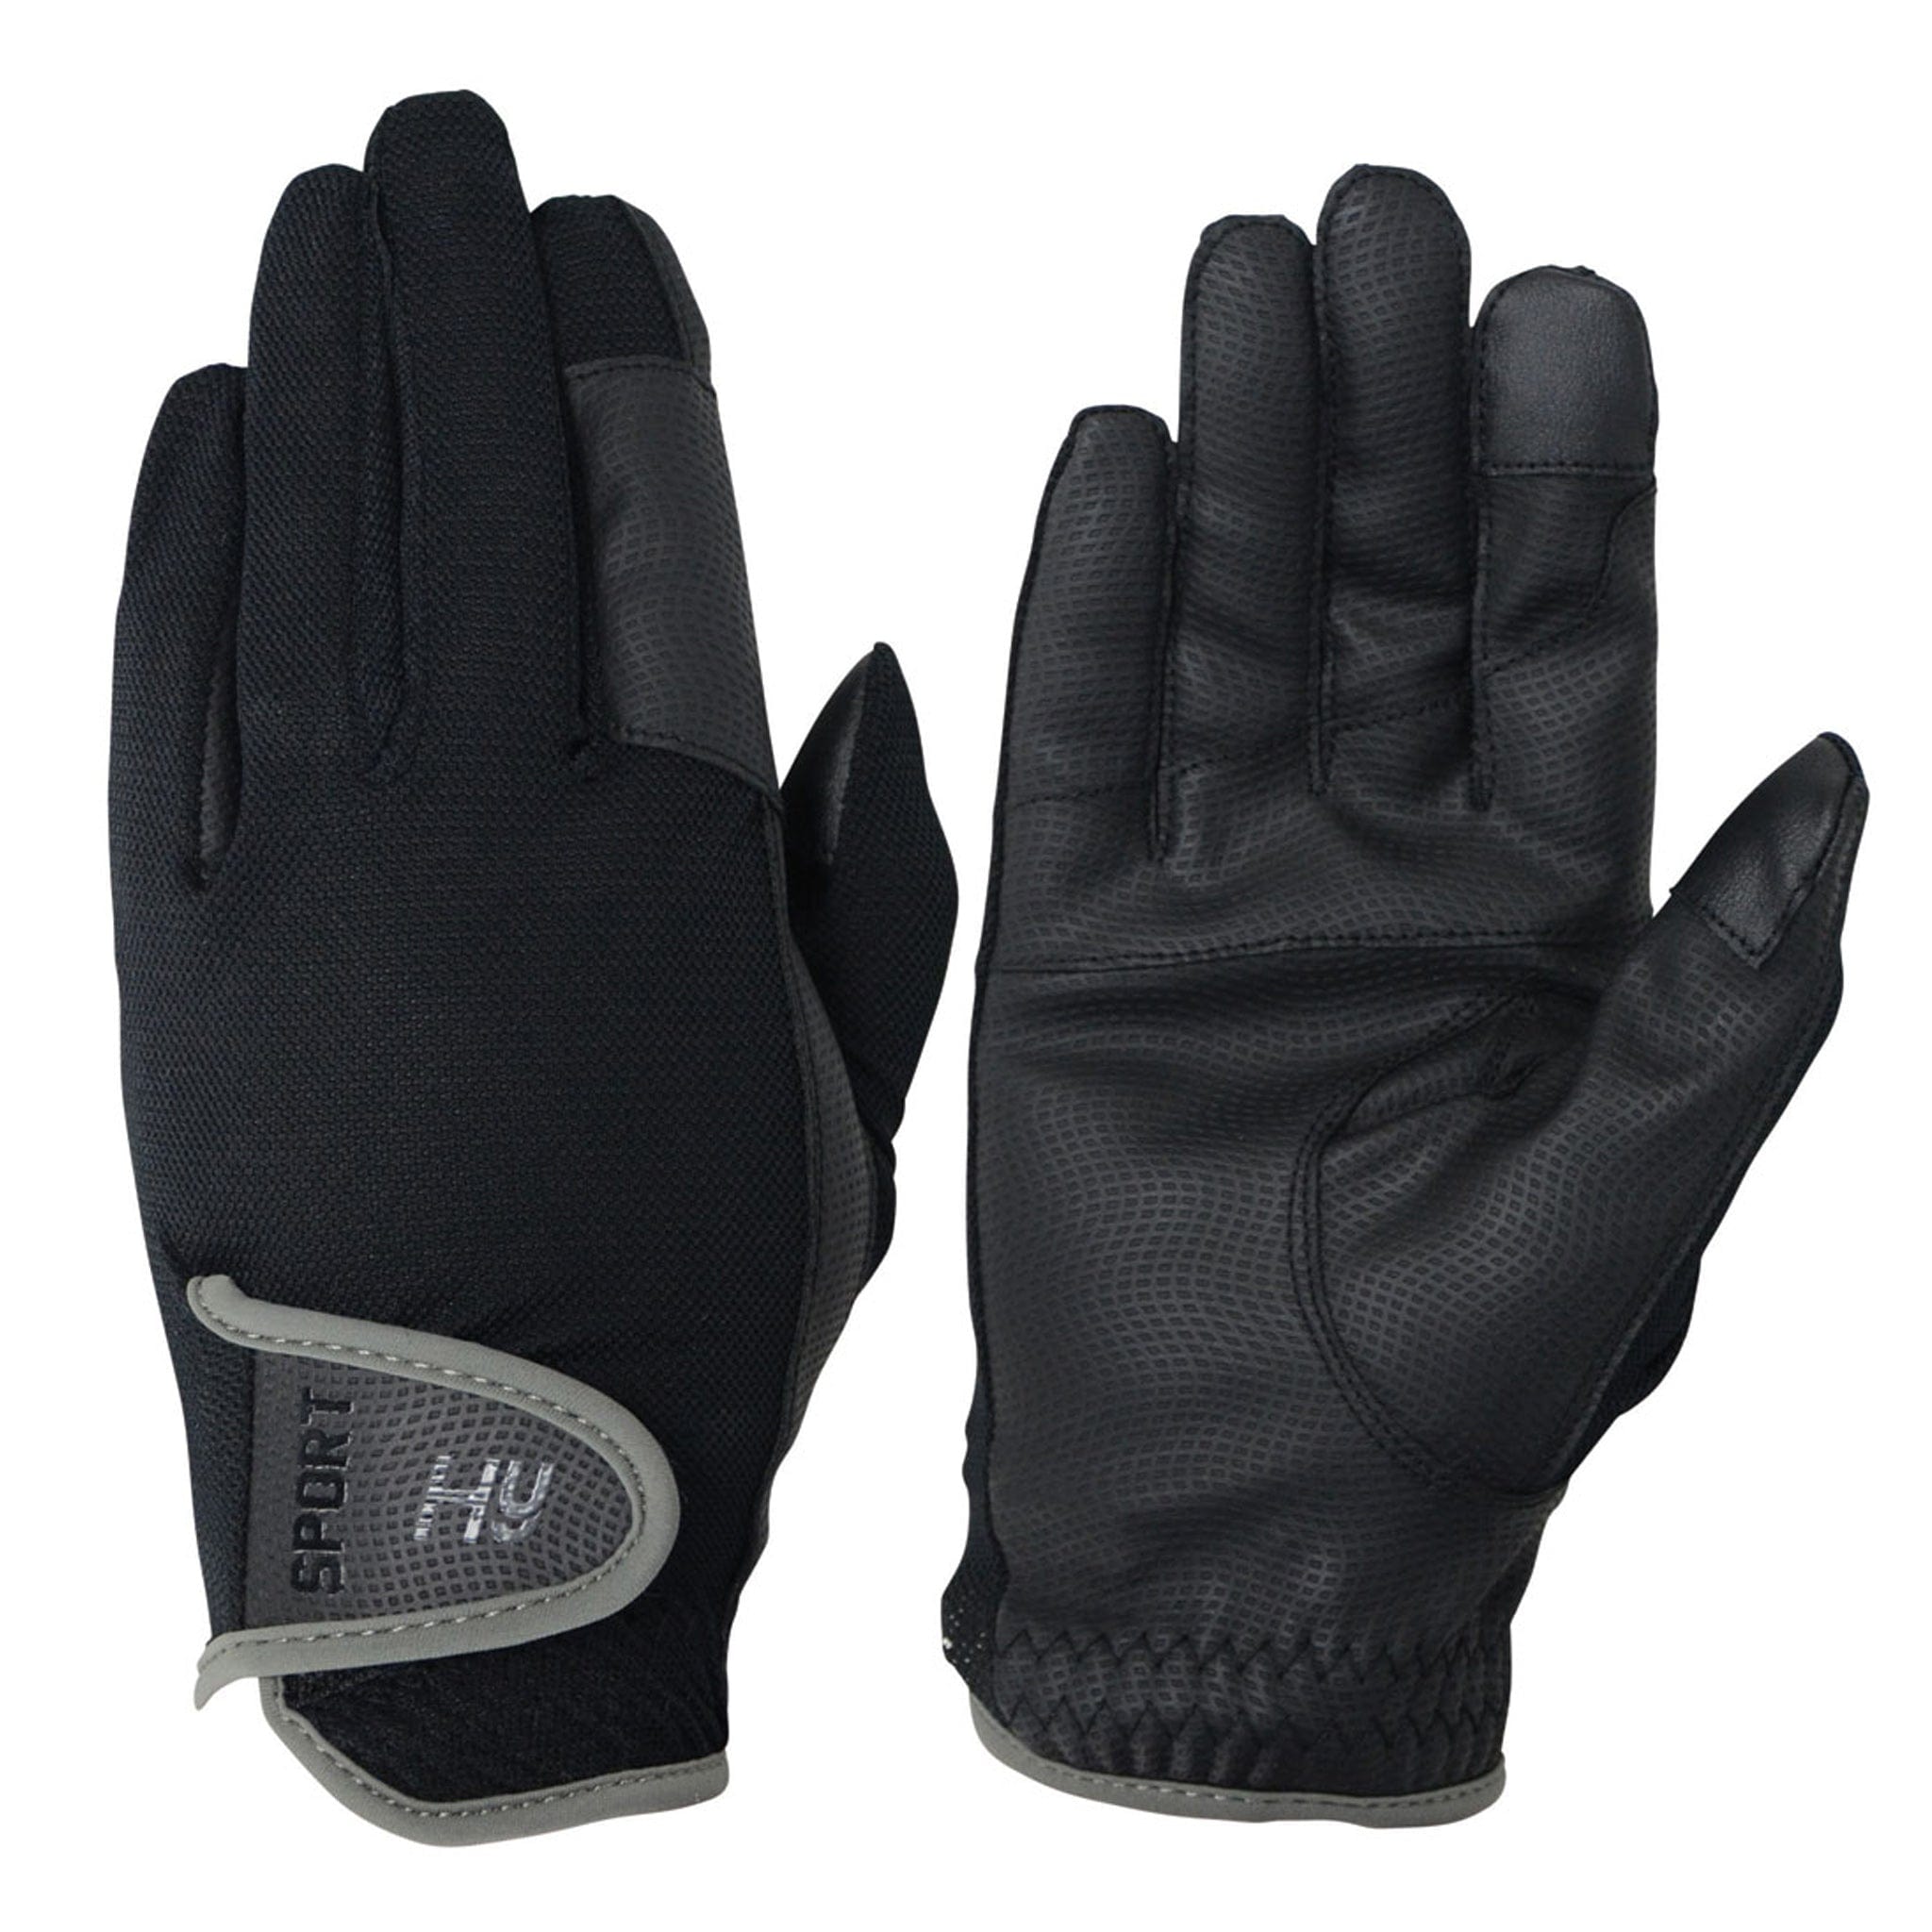 Hy5 Sport Dynamic Lightweight Riding Gloves 15545 Black and Grey